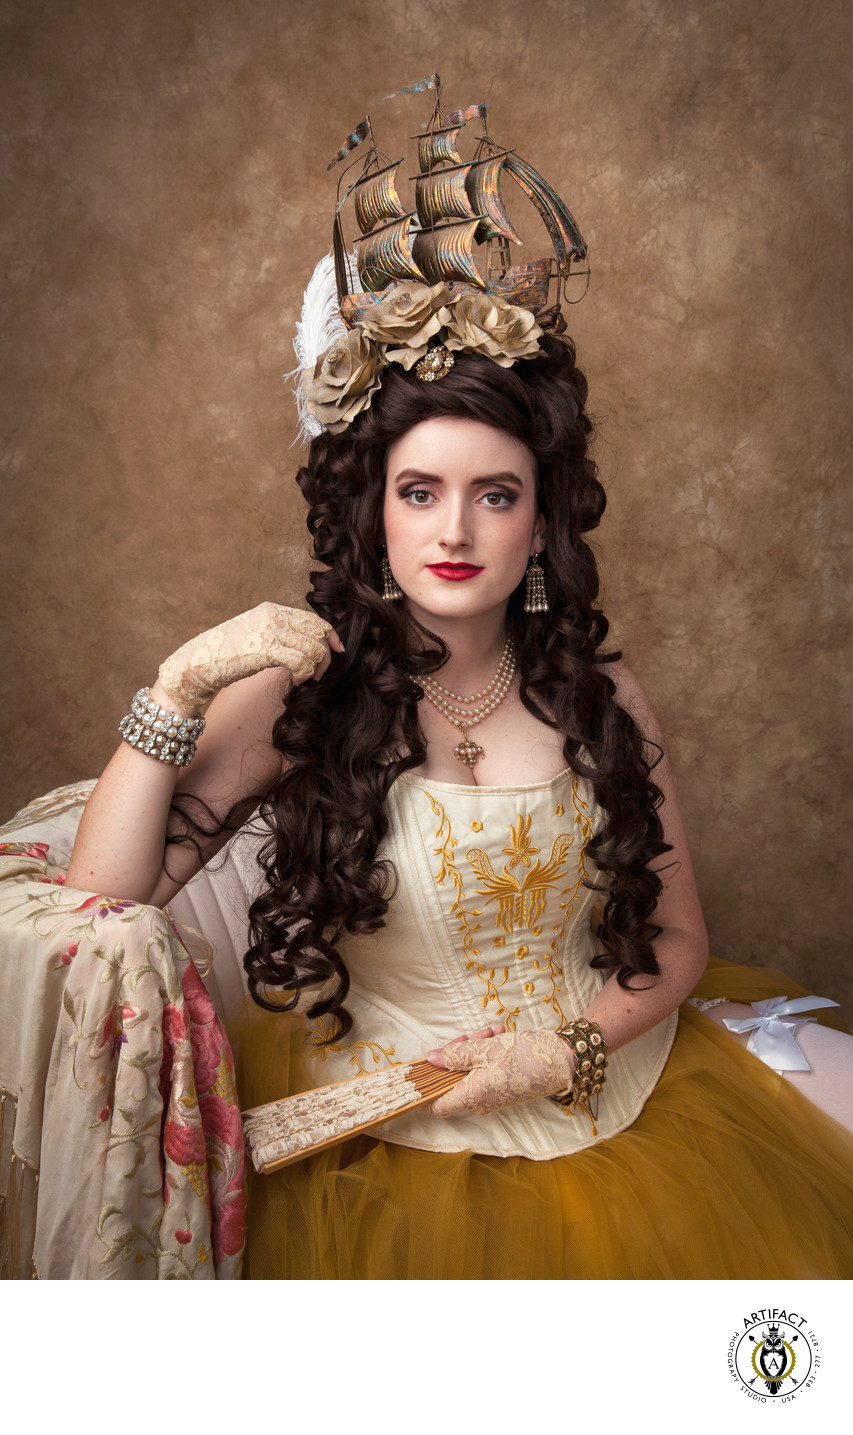 Marie-Antoinette Inspired Portrait with Ship | Maddie